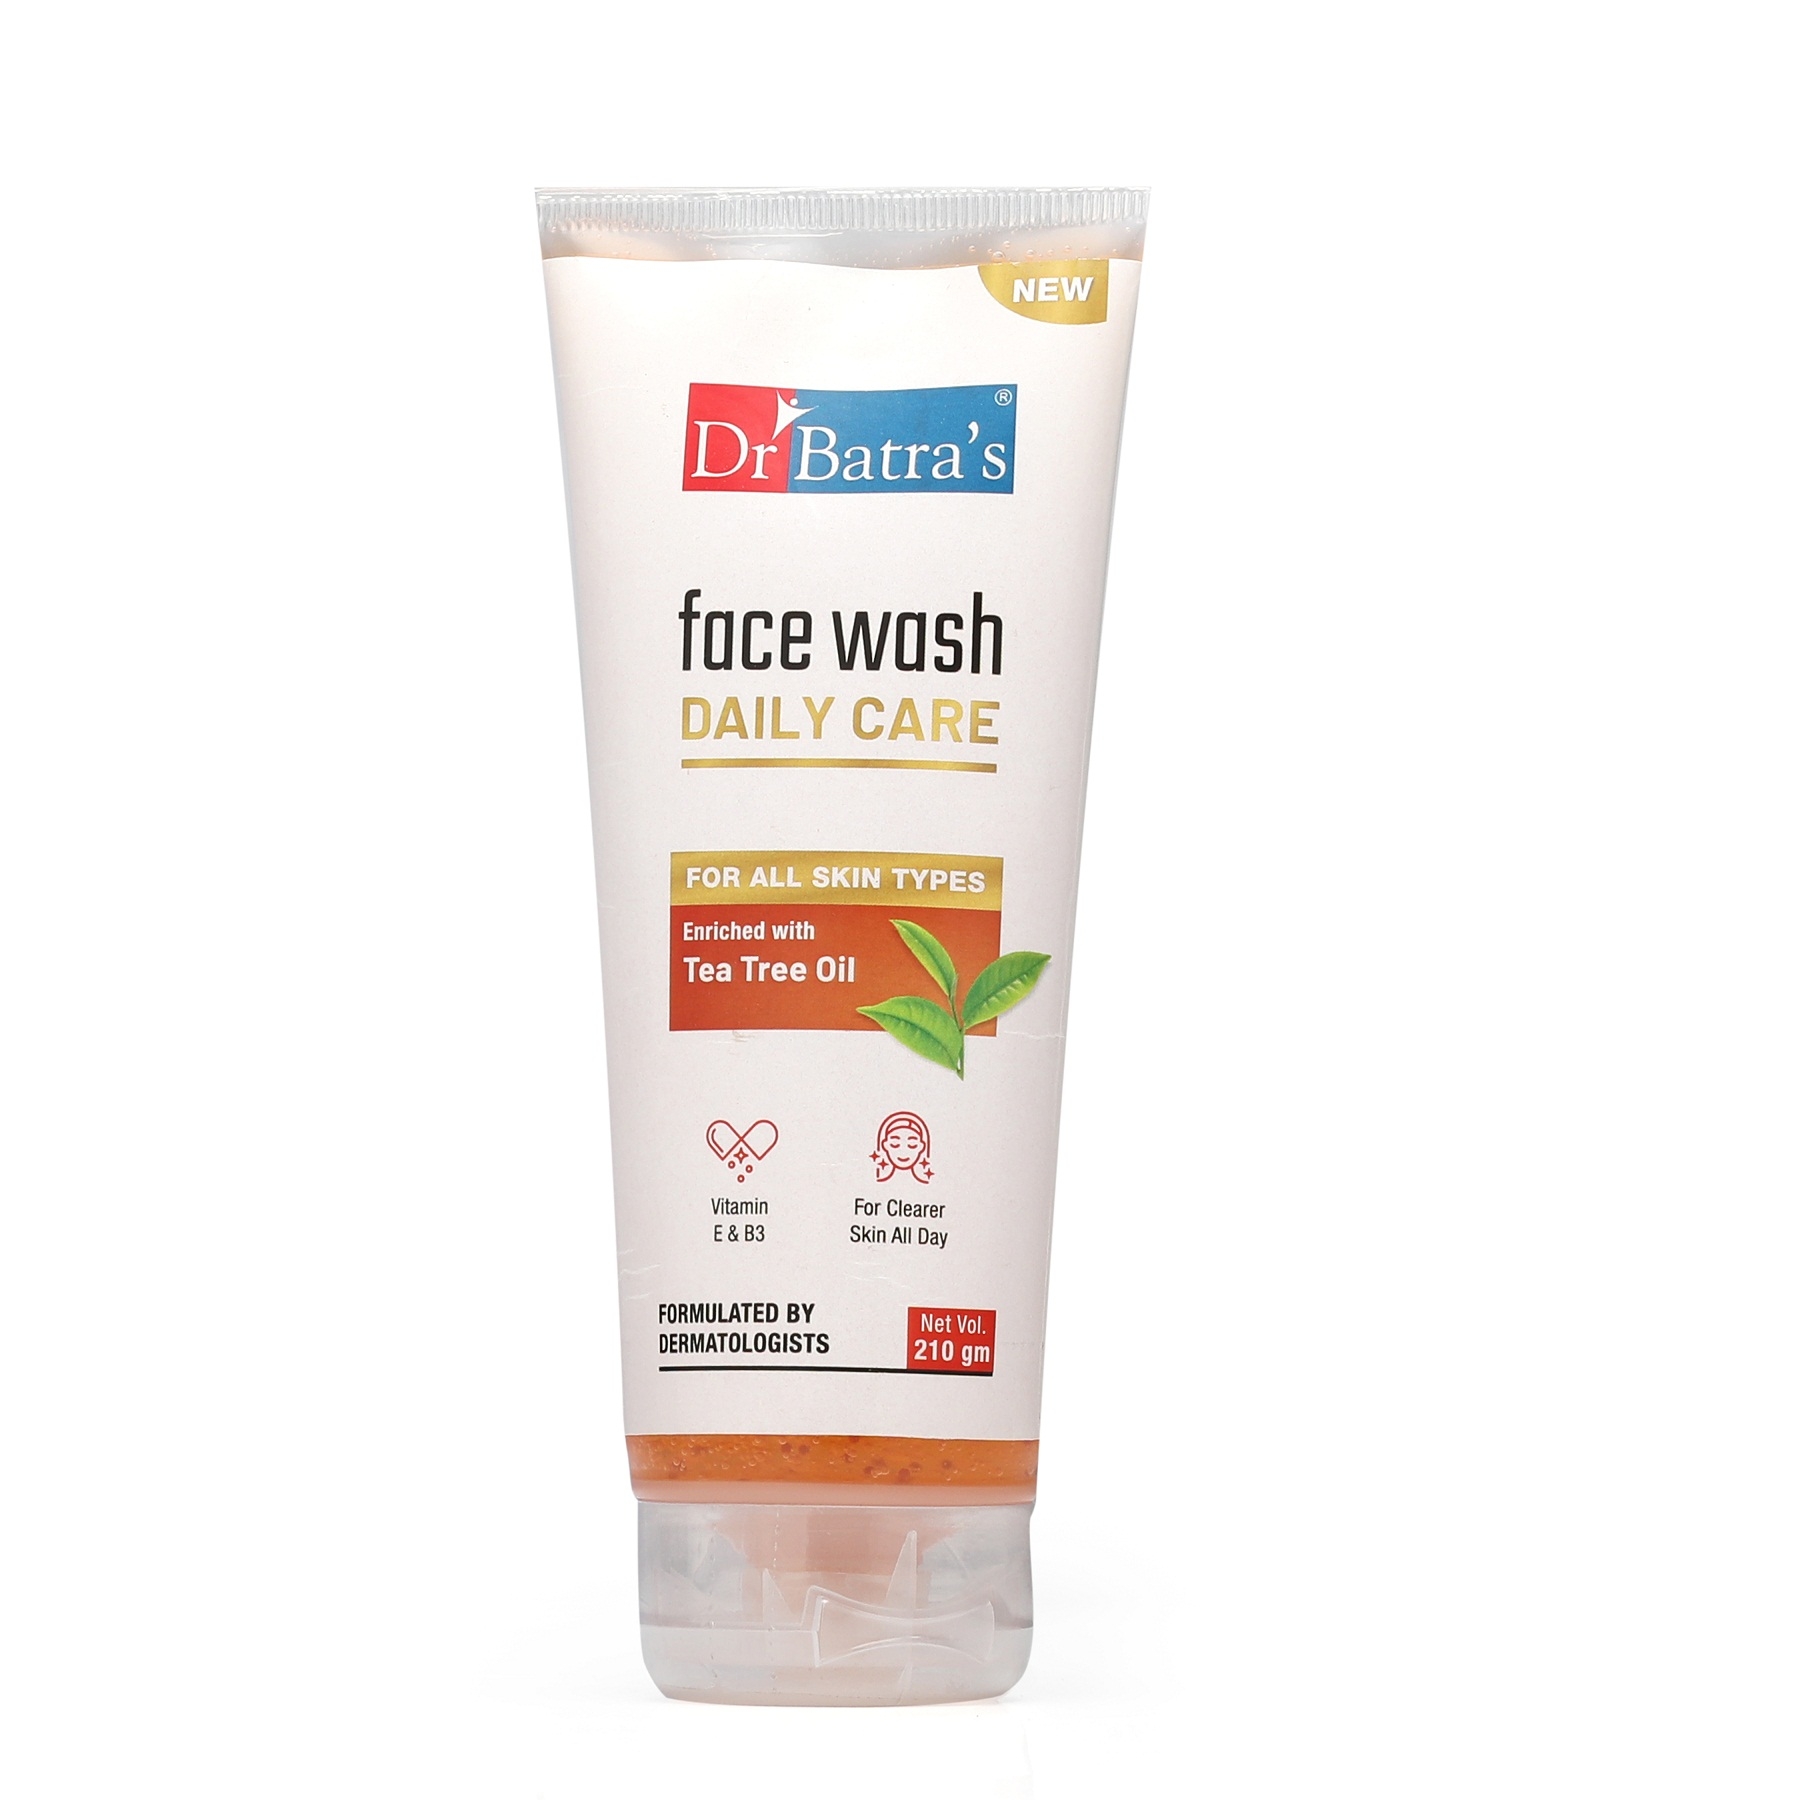 Dr Batra's | Dr Batra's Face Wash Daily Care Enriched With Tea Tree Oil - 210gm